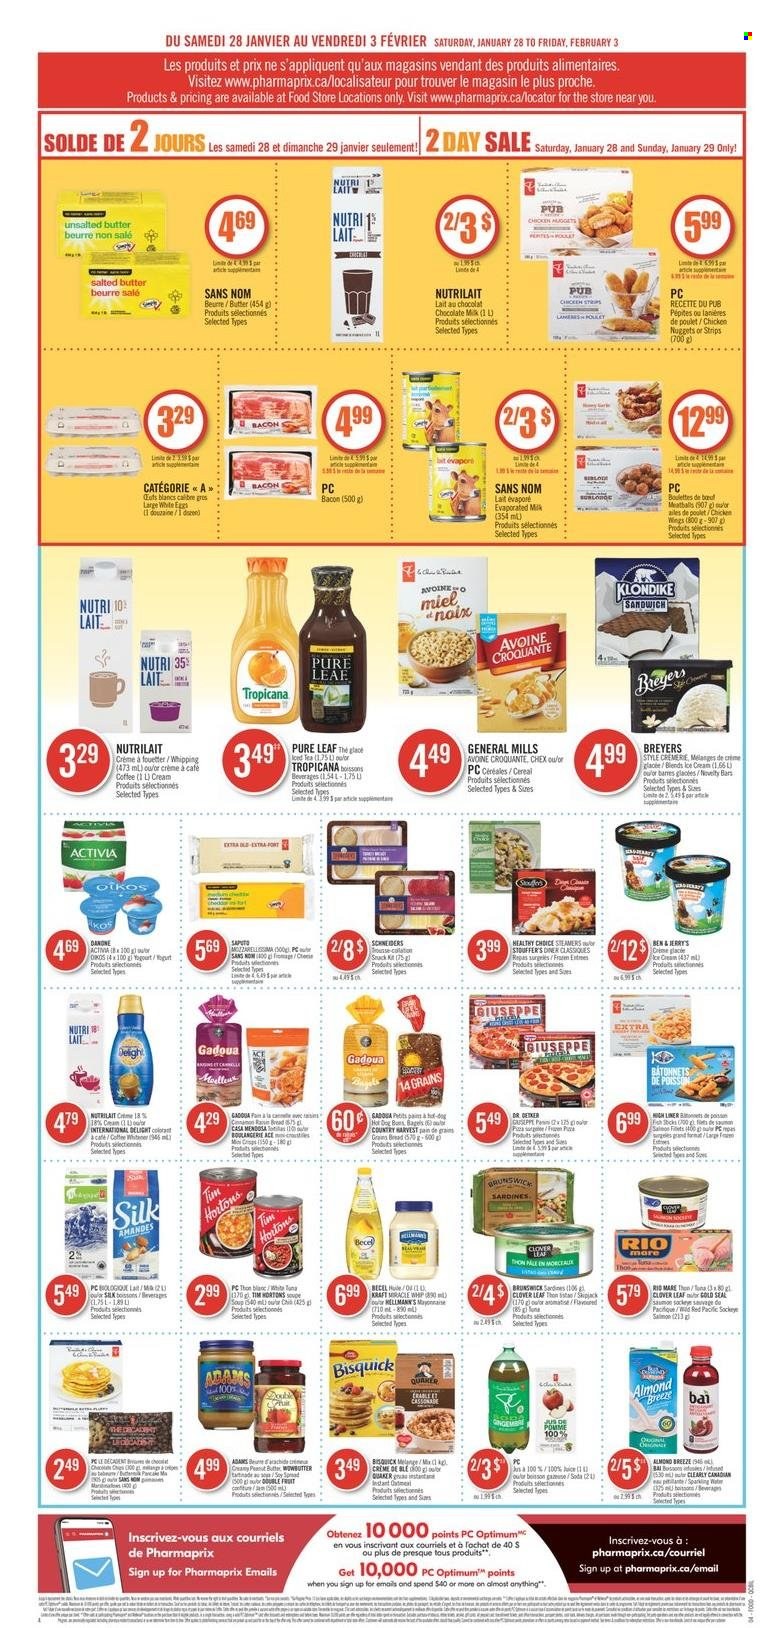 thumbnail - Pharmaprix Flyer - January 28, 2023 - February 03, 2023 - Sales products - bagels, bread, Ace, salmon, sardines, fish, fish fingers, fish sticks, hot dog, meatballs, sandwich, soup, nuggets, chicken nuggets, Quaker, Healthy Choice, Kraft®, bacon, Dr. Oetker, Clover, Activia, evaporated milk, Silk, Almond Breeze, eggs, salted butter, mayonnaise, Miracle Whip, Hellmann’s, ice cream, Ben & Jerry's, Country Harvest, chicken wings, strips, chicken strips, Stouffer's, milk chocolate, Bisquick, cereals, dried fruit, juice, Bai, soda, tea, Pure Leaf, Optimum, raisins, Danone. Page 3.